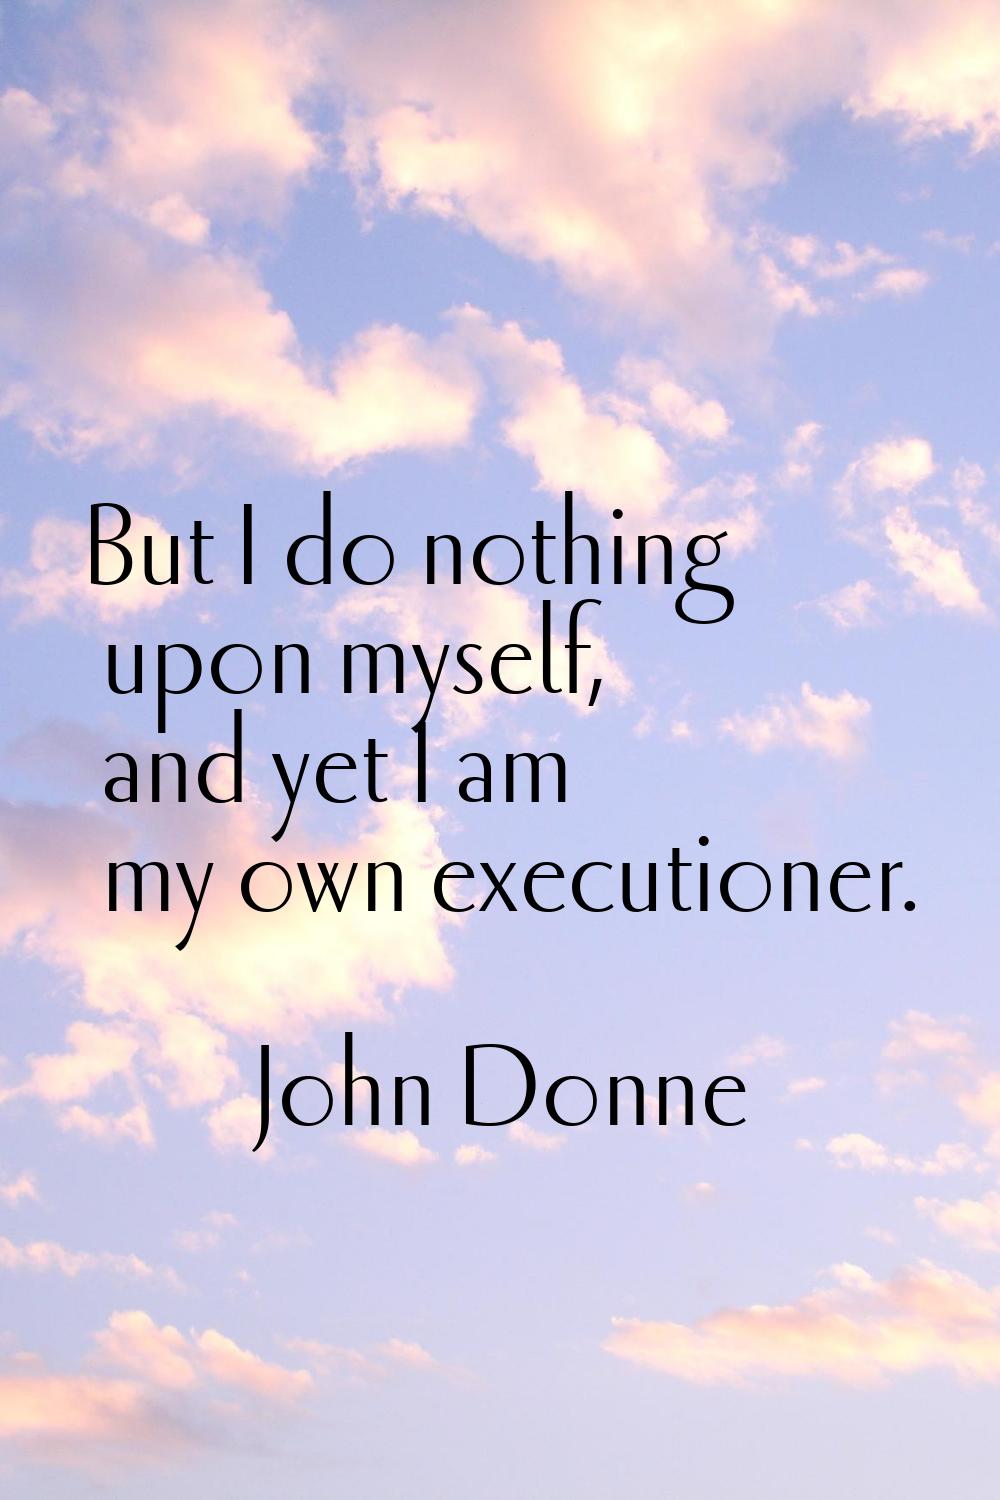 But I do nothing upon myself, and yet I am my own executioner.